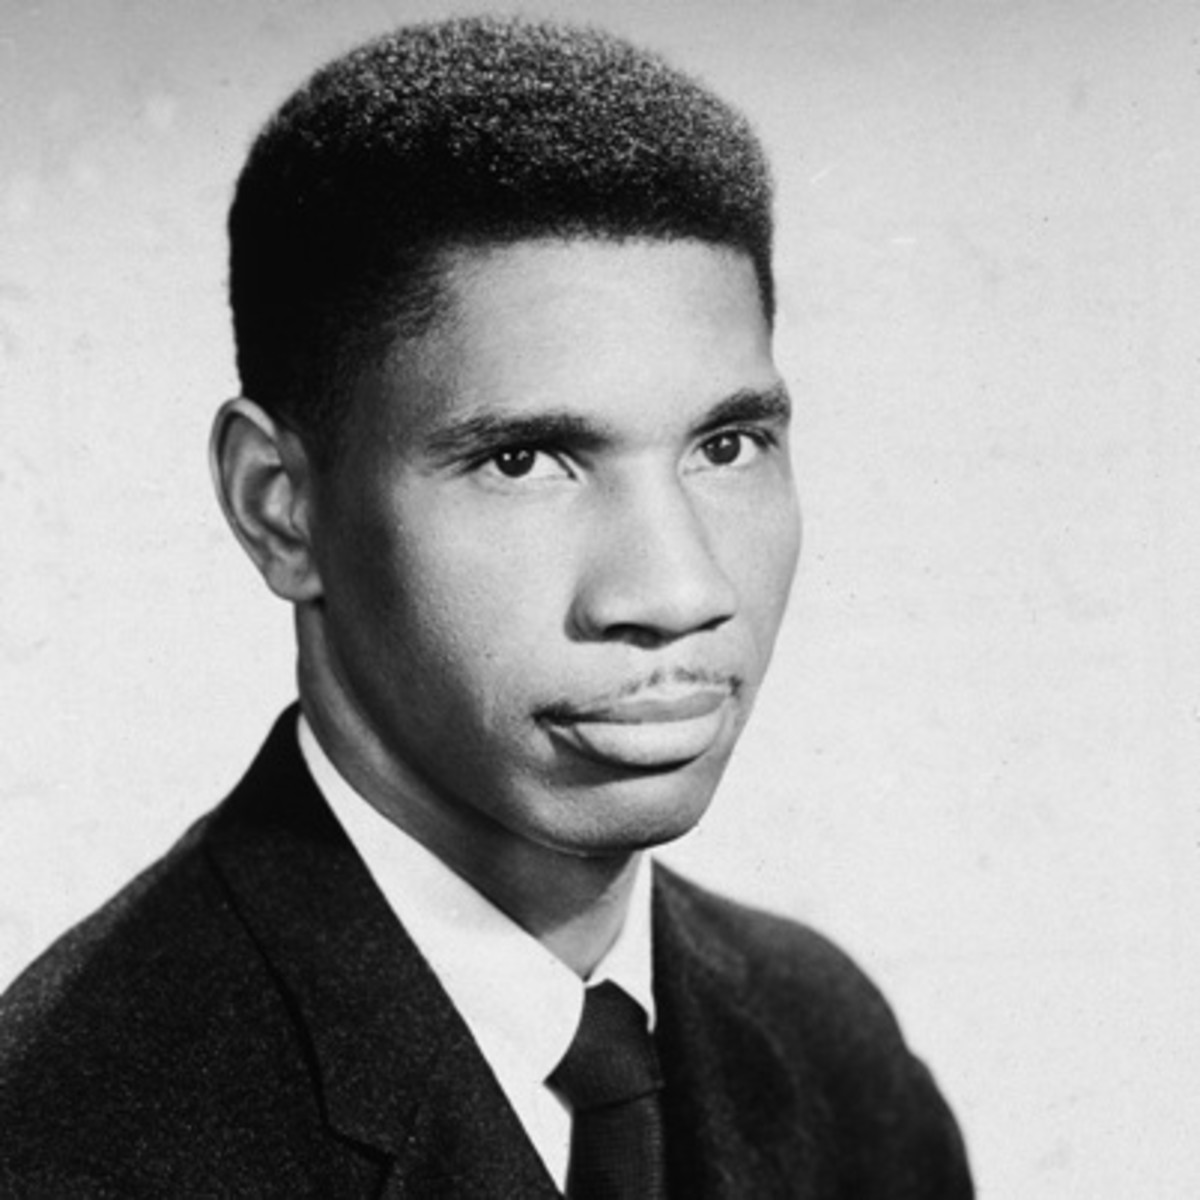 The photo of Medgar Evers